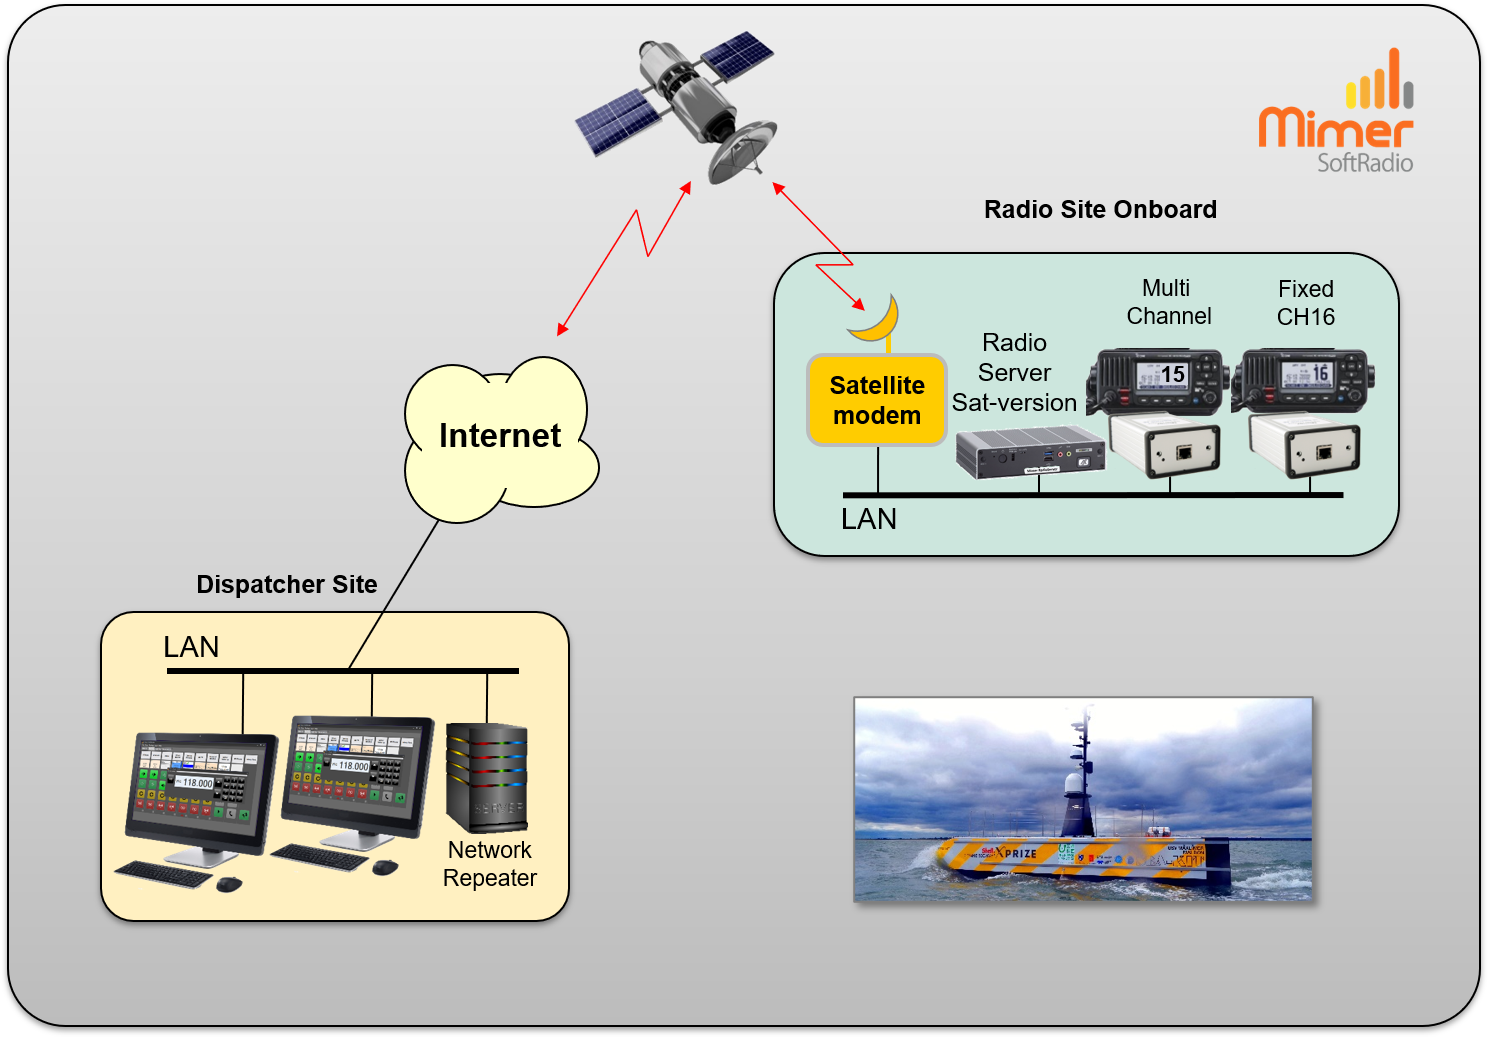 Remote control of radios onboard an unmanned ship